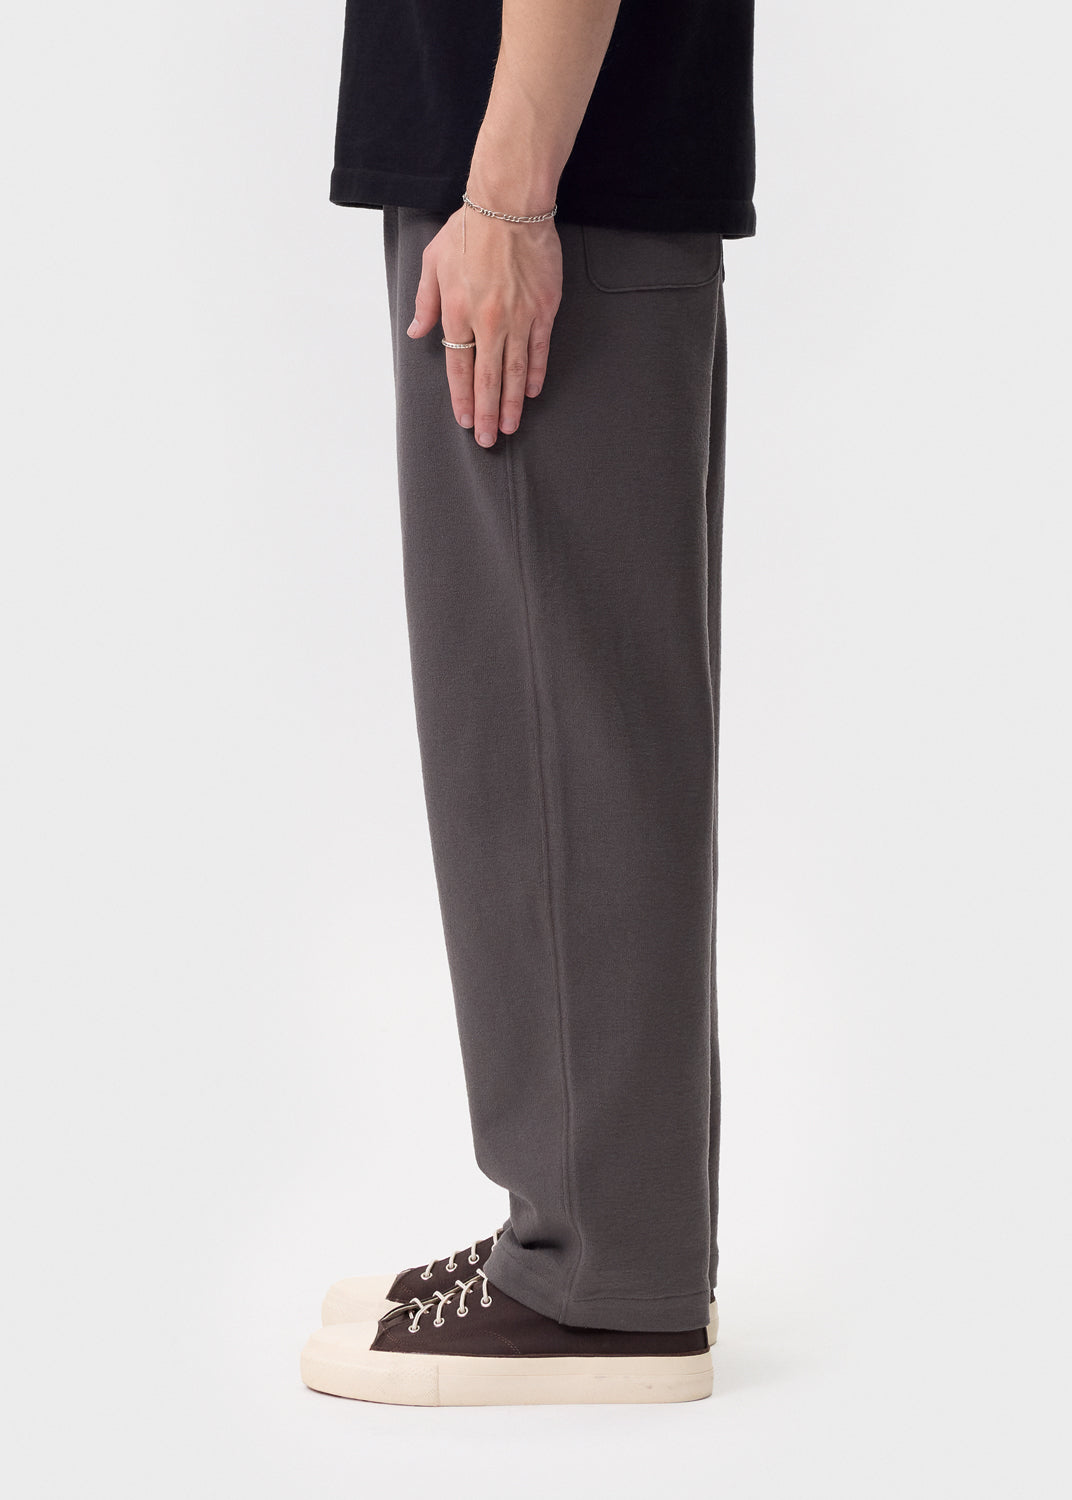 Lady White Co. - Grey Textured Lounge Pants | 1032 SPACE